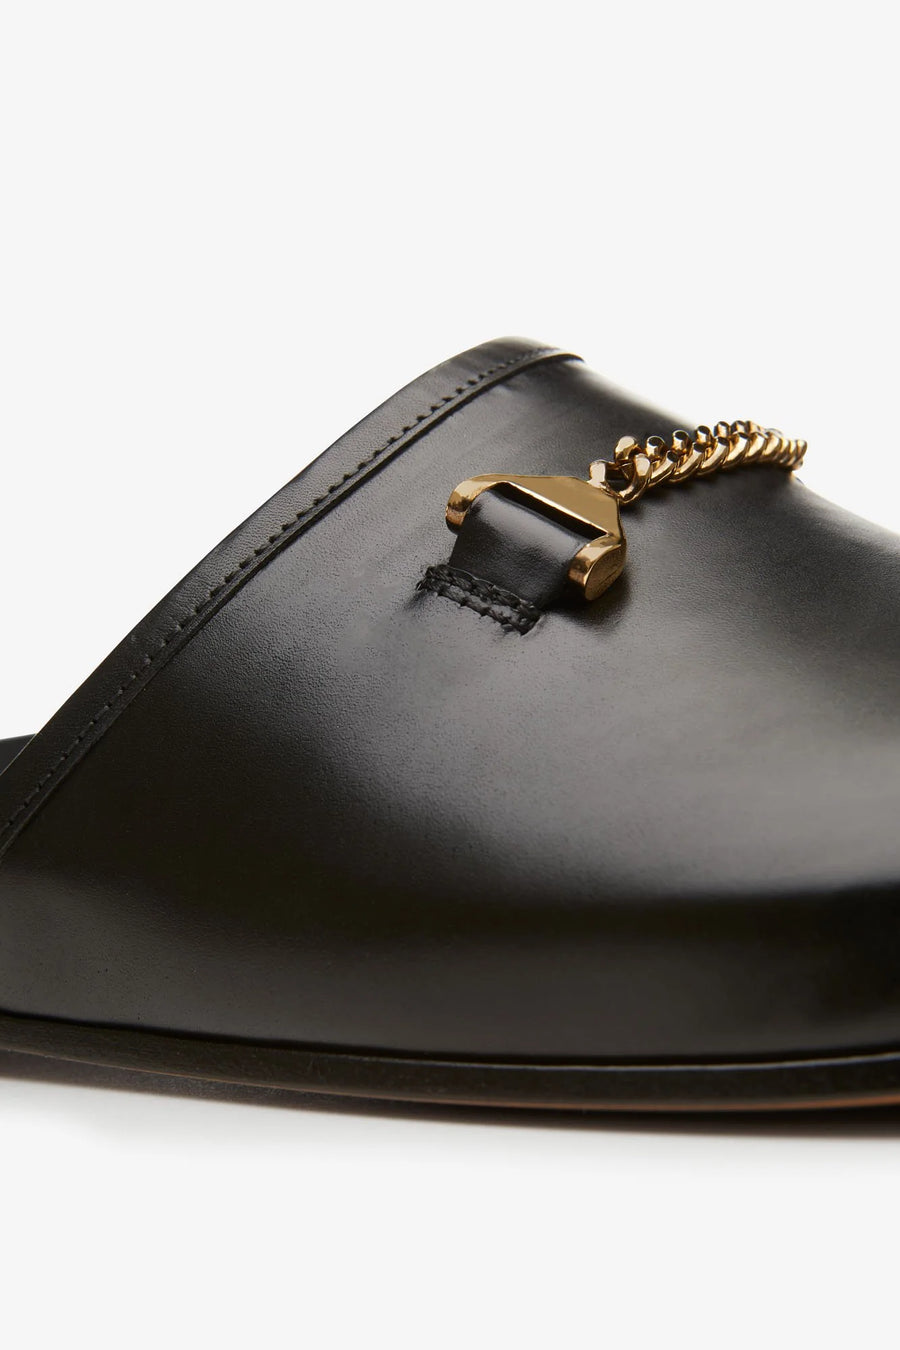 Quincy Slipper Black Leather